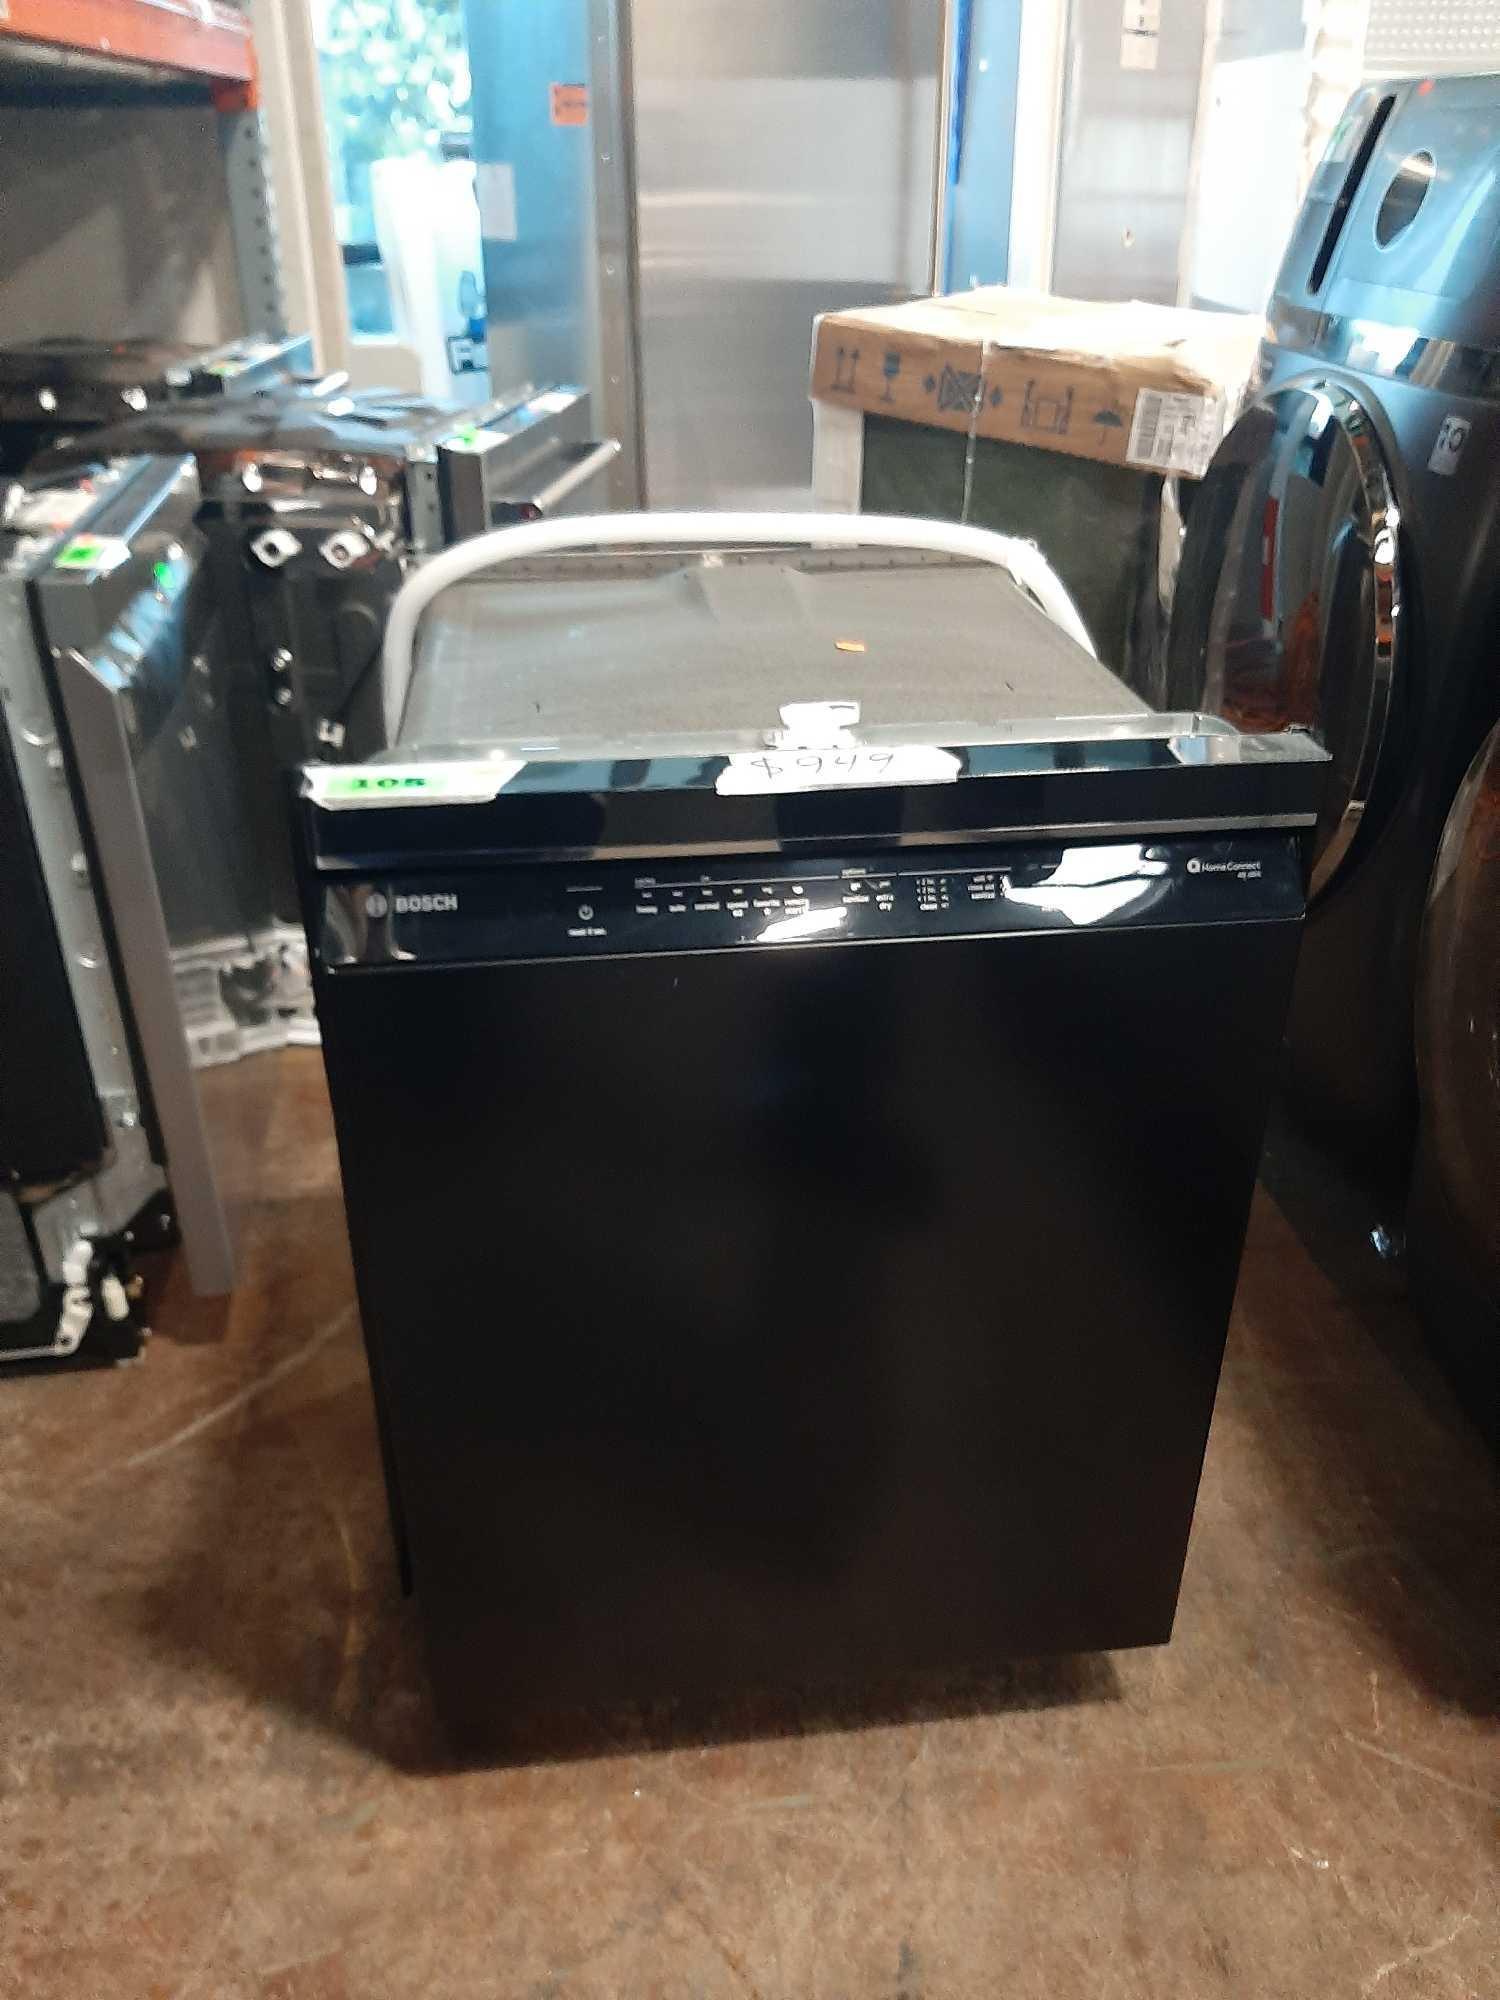 Bosch 300 Series 24 in. Front Control Smart Built in Dishwasher*PREVIOUSLY INSTALLED*